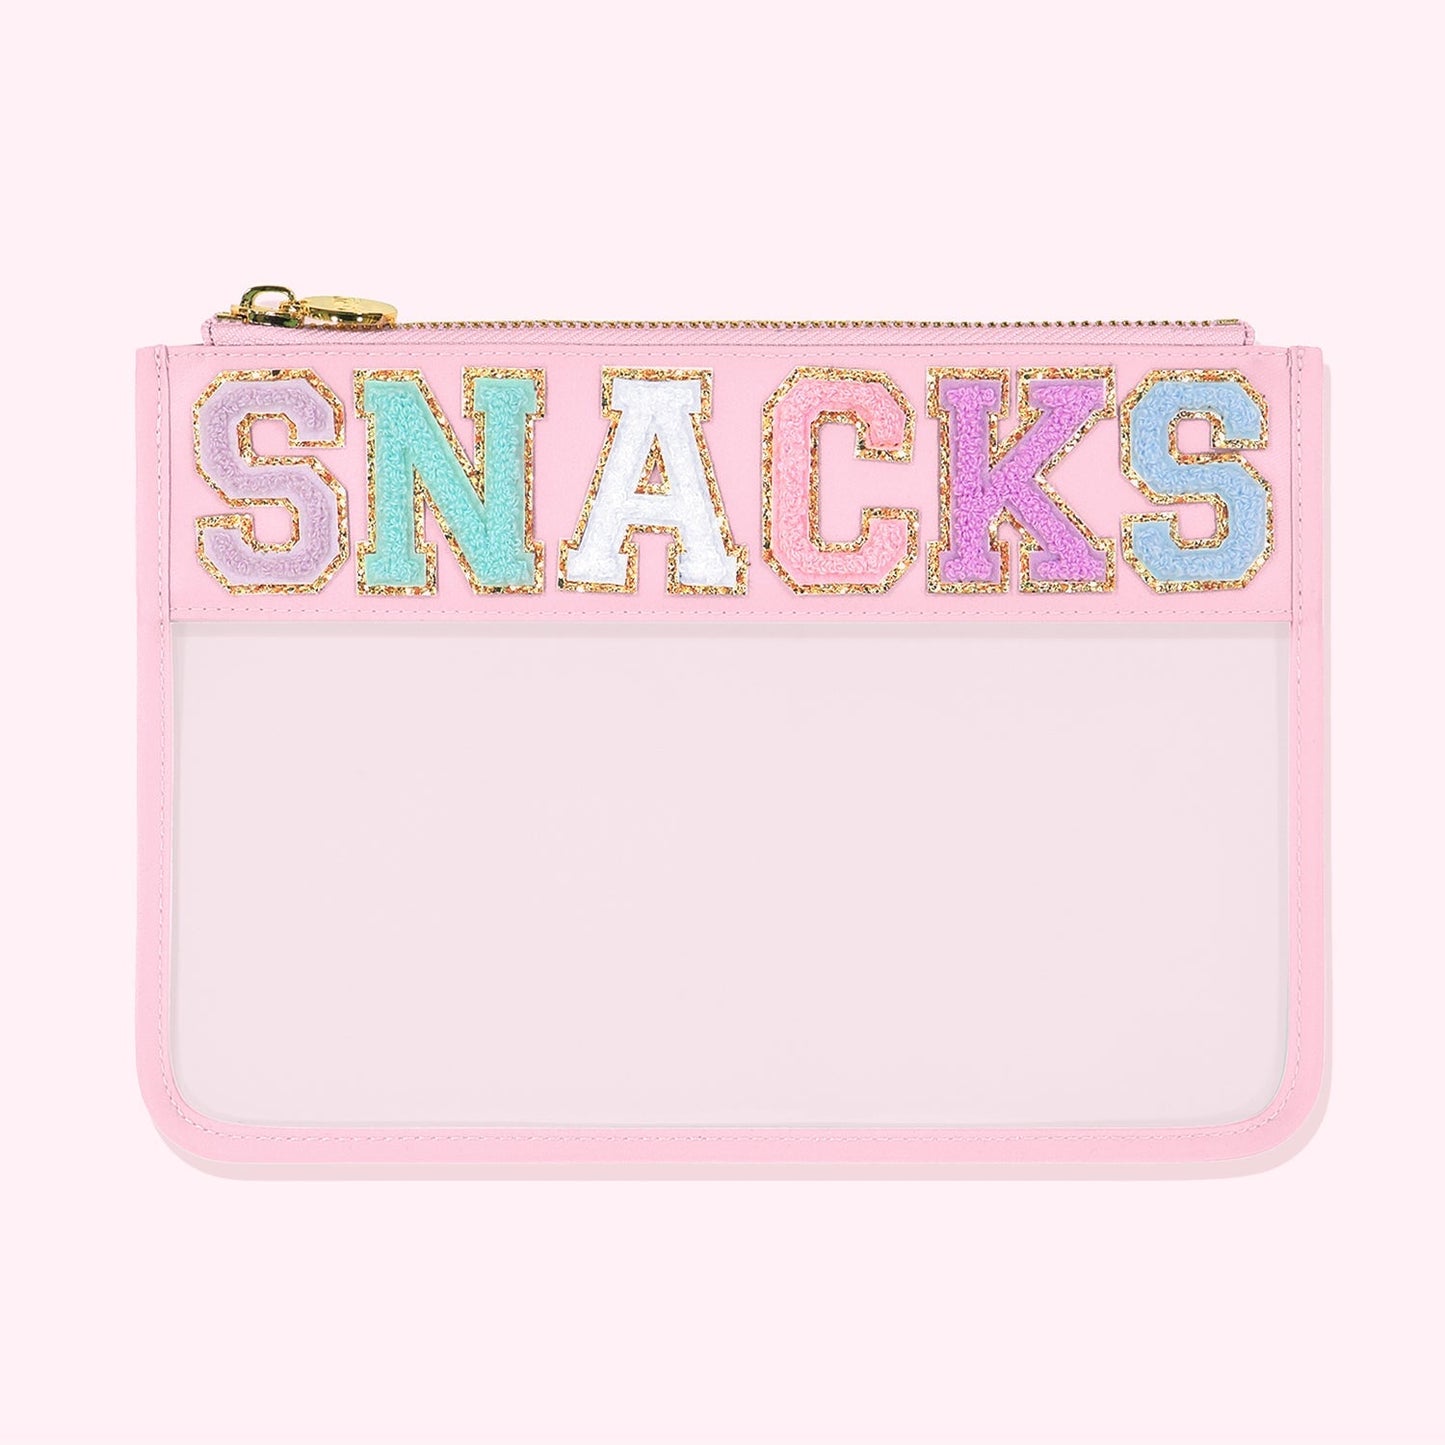 "Snacks" Clear Flat Pouch